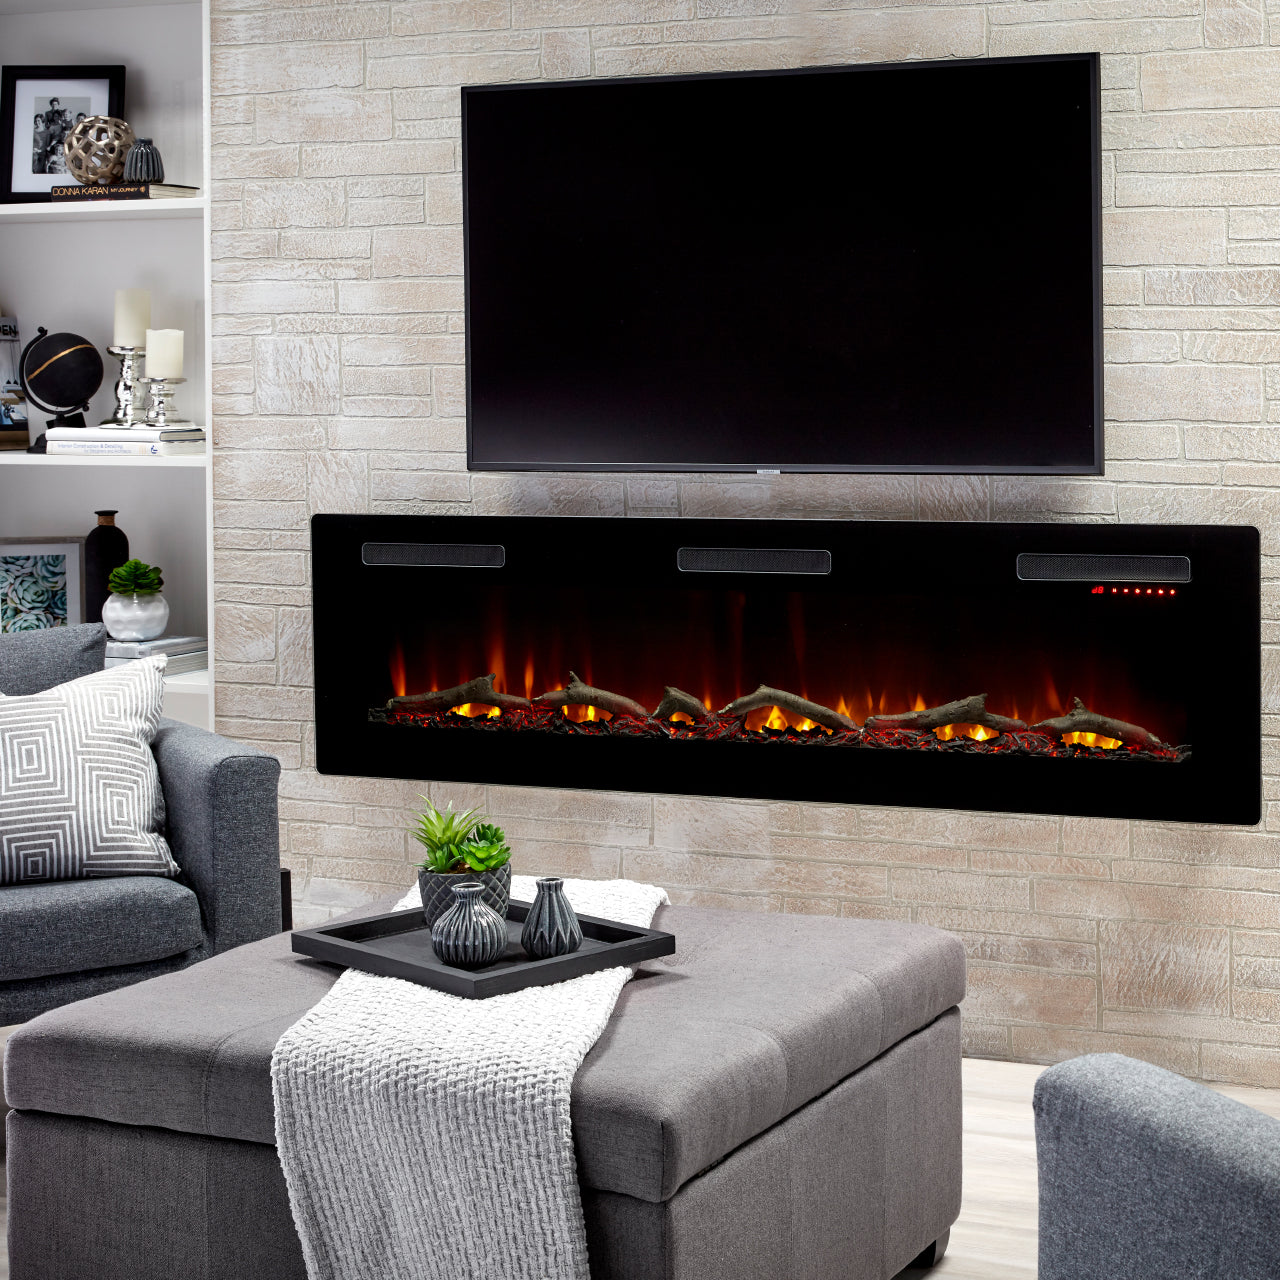 Dimplex Sierra 72-Inch Linear Electric Fireplace - SIL72 - Fireplace Choice